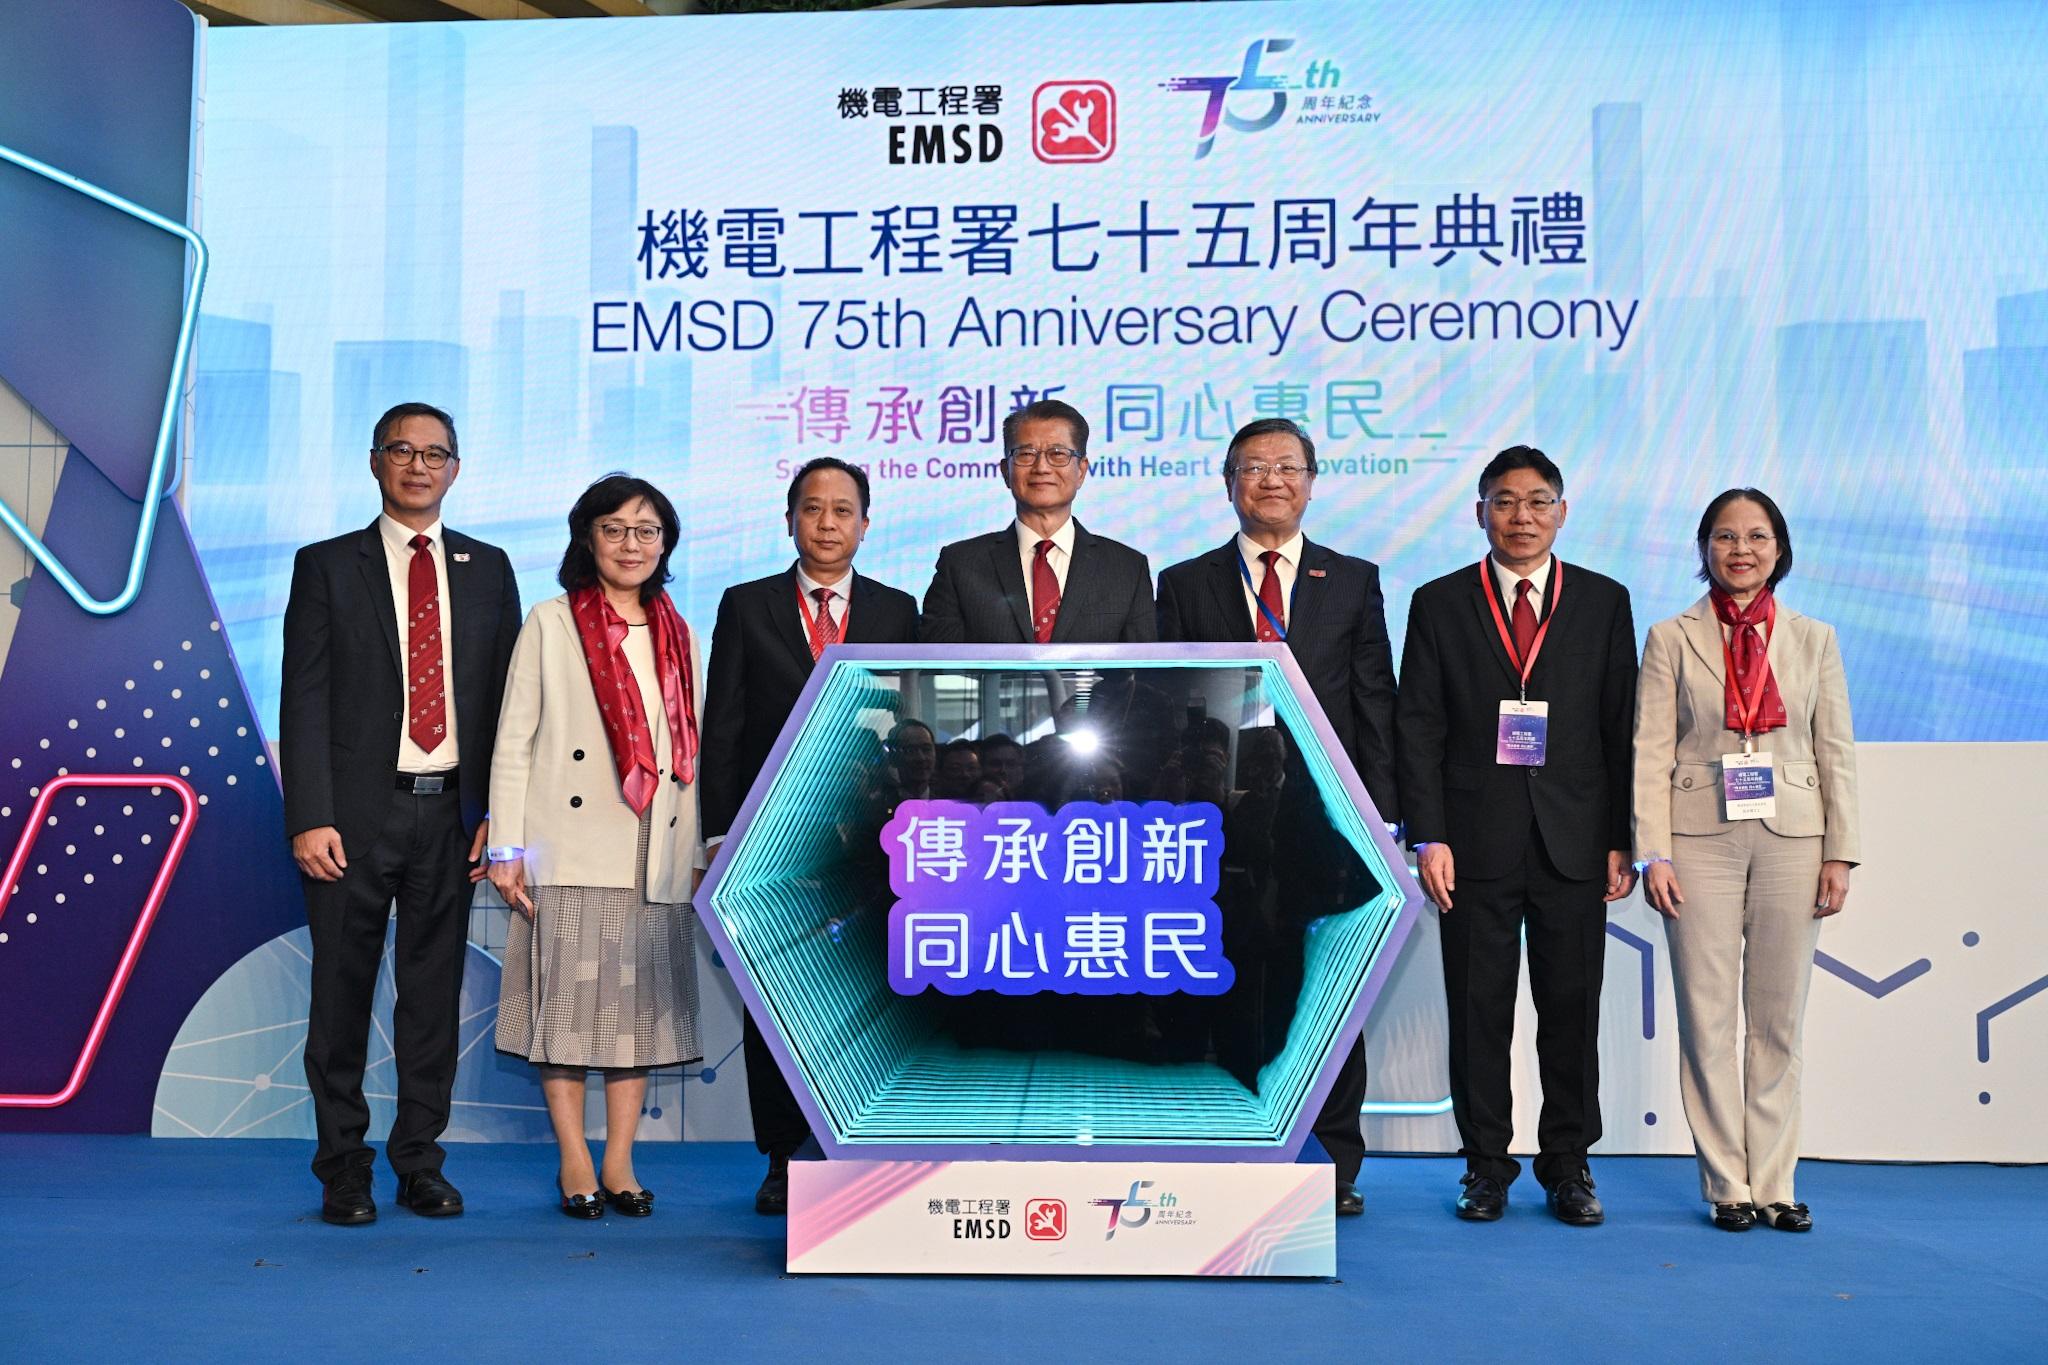 The Electrical and Mechanical Services Department (EMSD) held the 75th Anniversary Ceremony today (November 30). Photo shows (from left) the Permanent Secretary for Development (Works), Mr Ricky Lau; the Secretary for Development, Ms Bernadette Linn; the Deputy Director-General of the Department of Educational, Scientific and Technological Affairs of the Liaison Office of the Central People's Government in the Hong Kong Special Administrative Region, Mr Ye Shuiqiu; the Financial Secretary, Mr Paul Chan; the Director of Electrical and Mechanical Services, Mr Eric Pang; the Secretary for Transport and Logistics, Mr Lam Sai-hung; and the Acting Secretary for Environment and Ecology, Miss Diane Wong, at the ceremony.